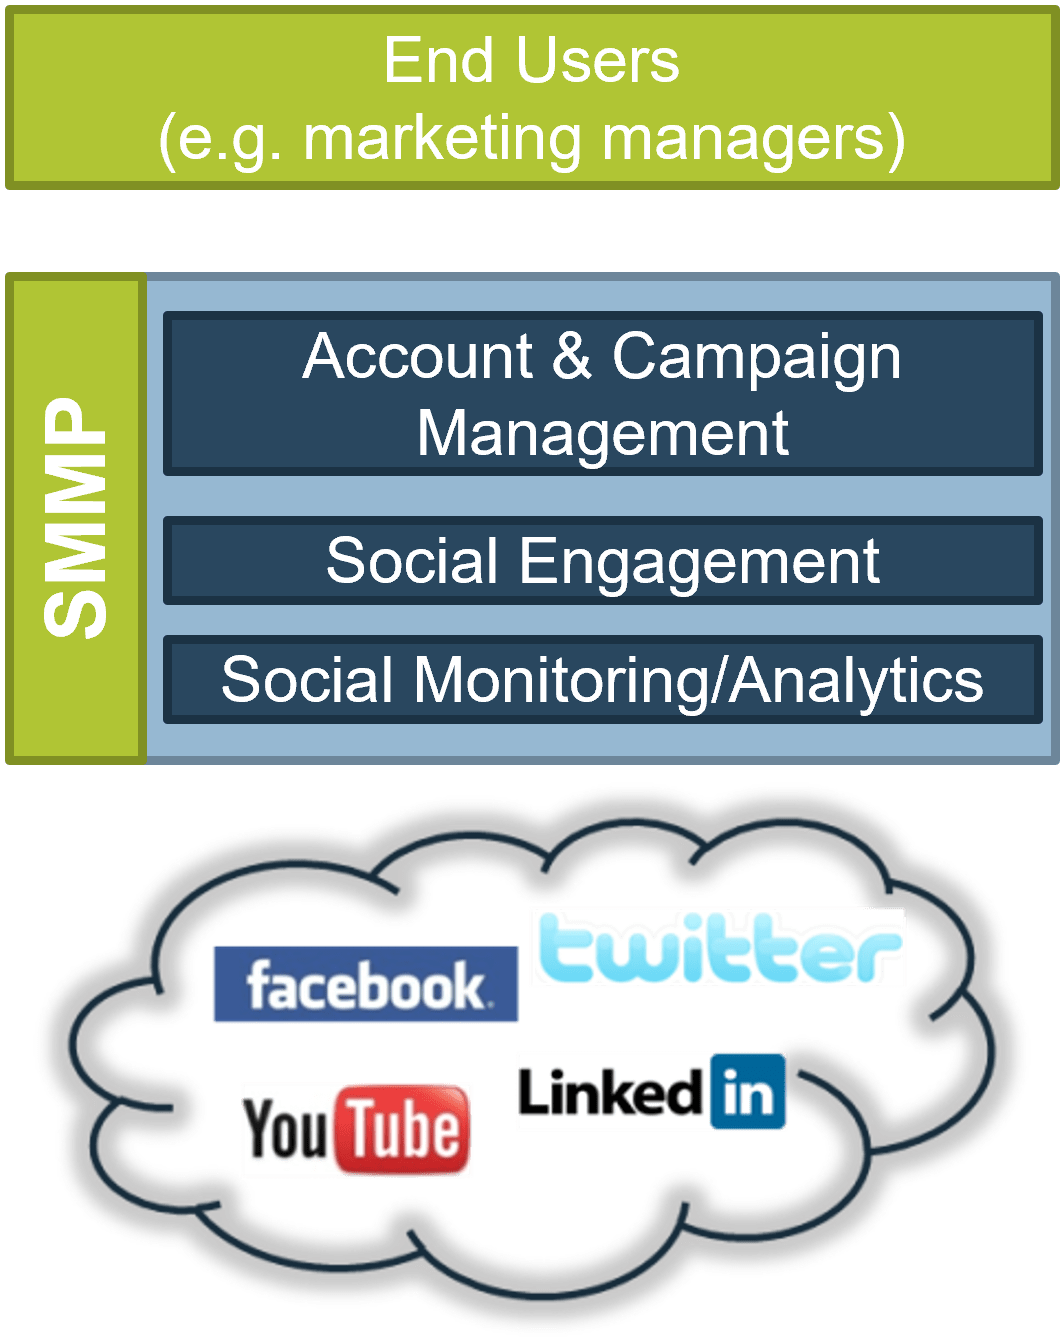 Diagram with 'End Users (e.g. marketing managers)' at the top and social platforms like Facebook and Twitter at the bottom; in between them are 'SMMPs’: 'Account & Campaign Management', 'Social Engagement', and 'Social Monitoring/Analytics'.